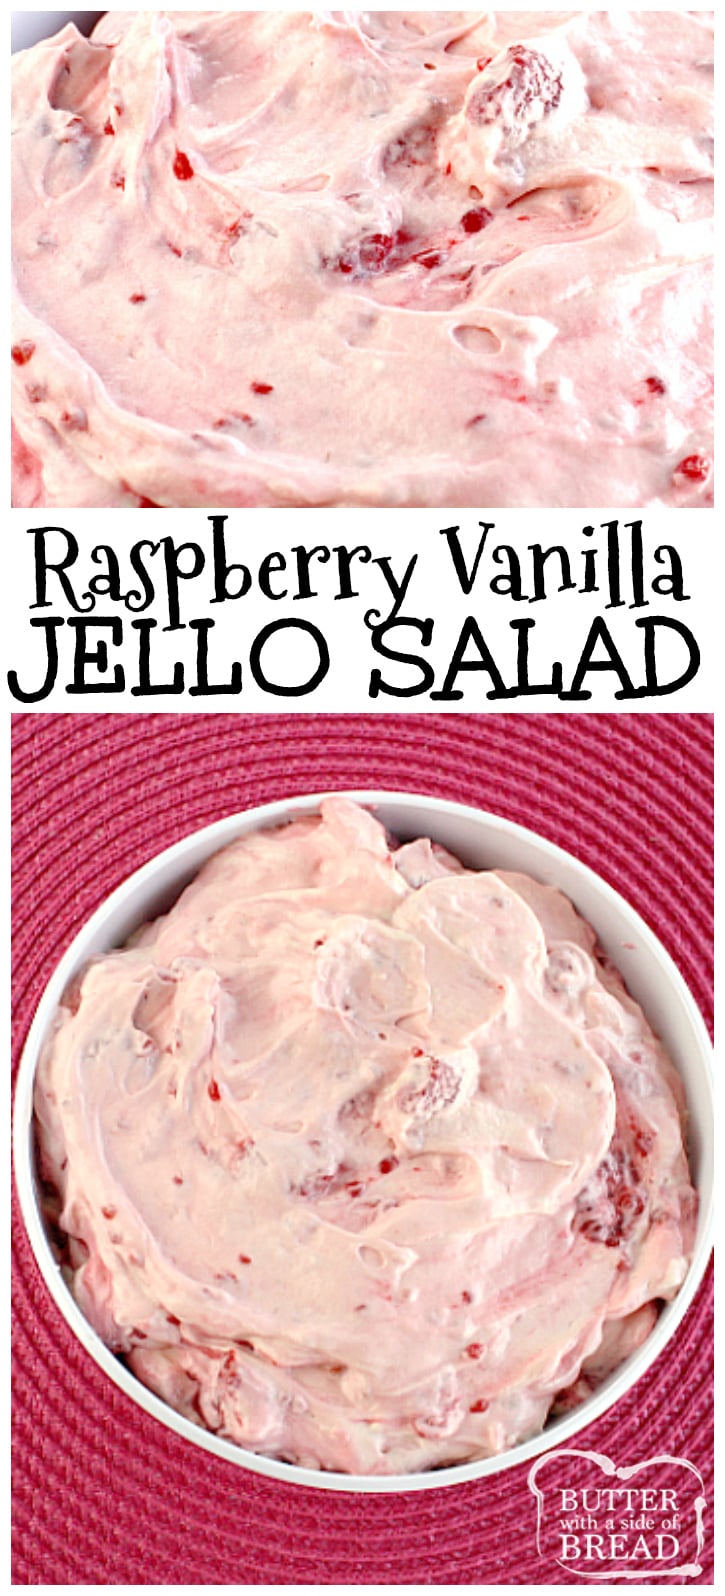 Raspberry Vanilla Jello Salad is one of the easiest recipes you will ever make and it's perfect as a side dish or even dessert!